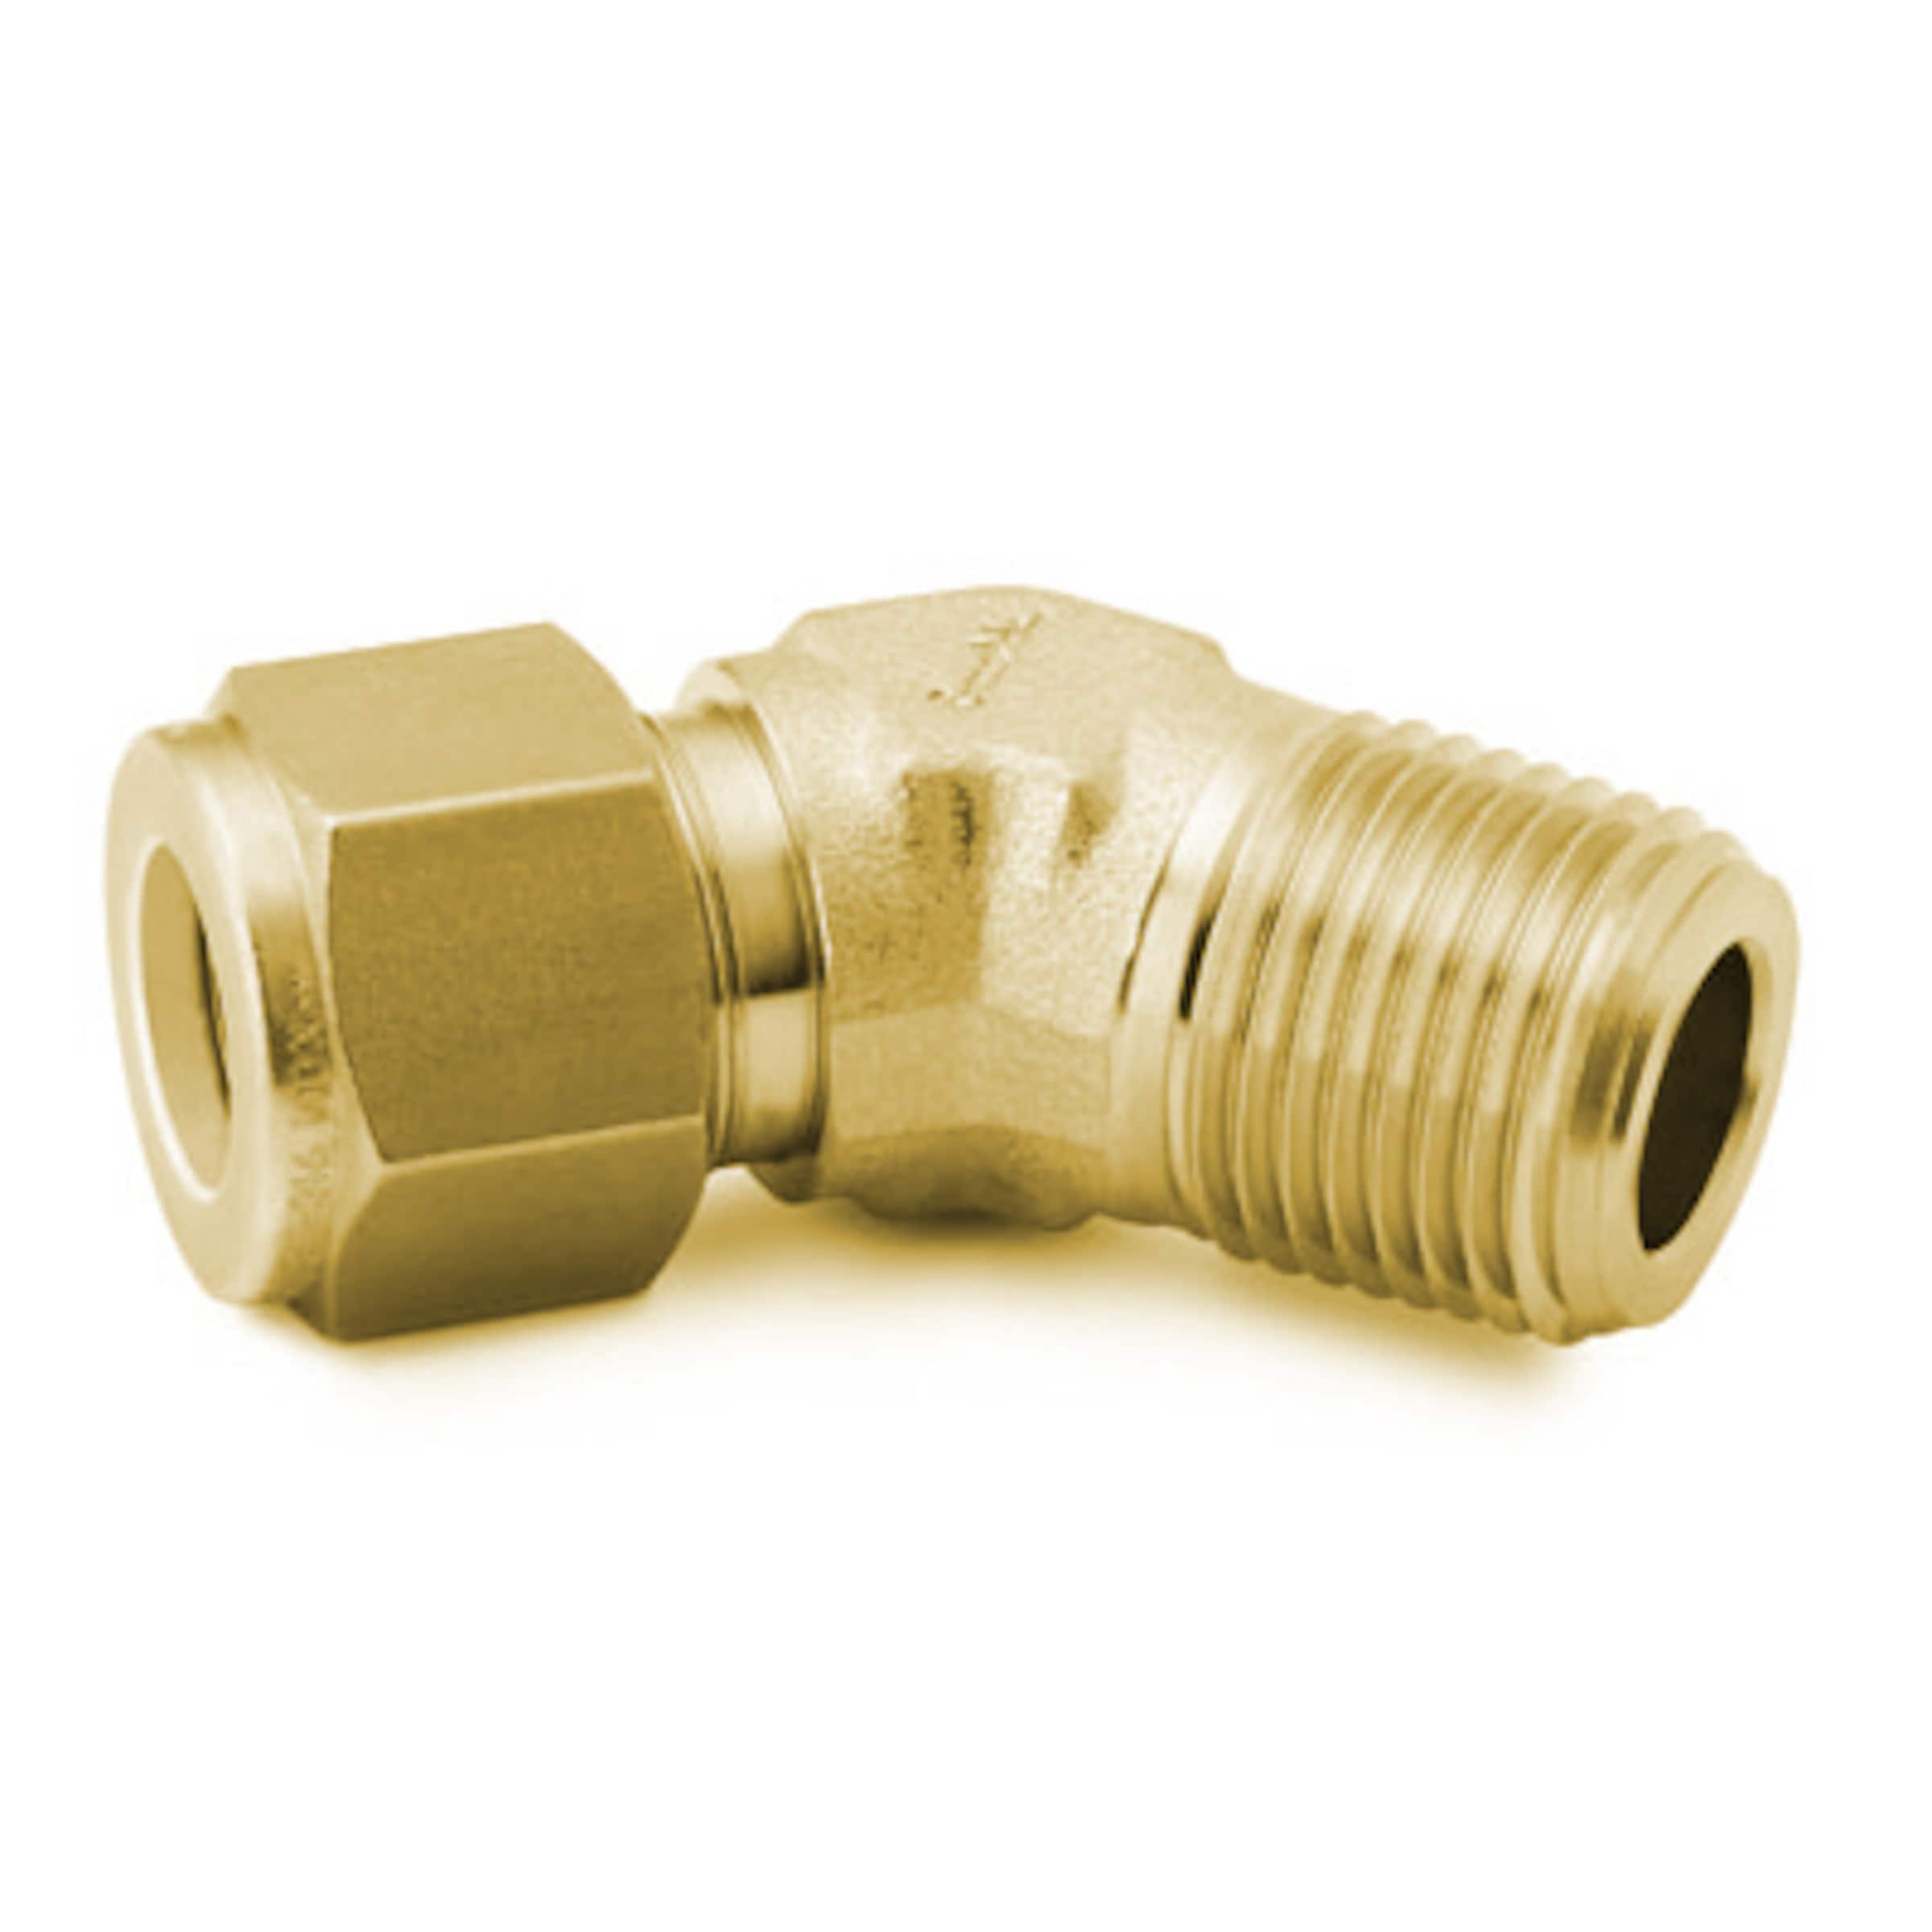 Brass Compression Fittings - 45 Degree Elbows - 3/16 COMP x 1/8